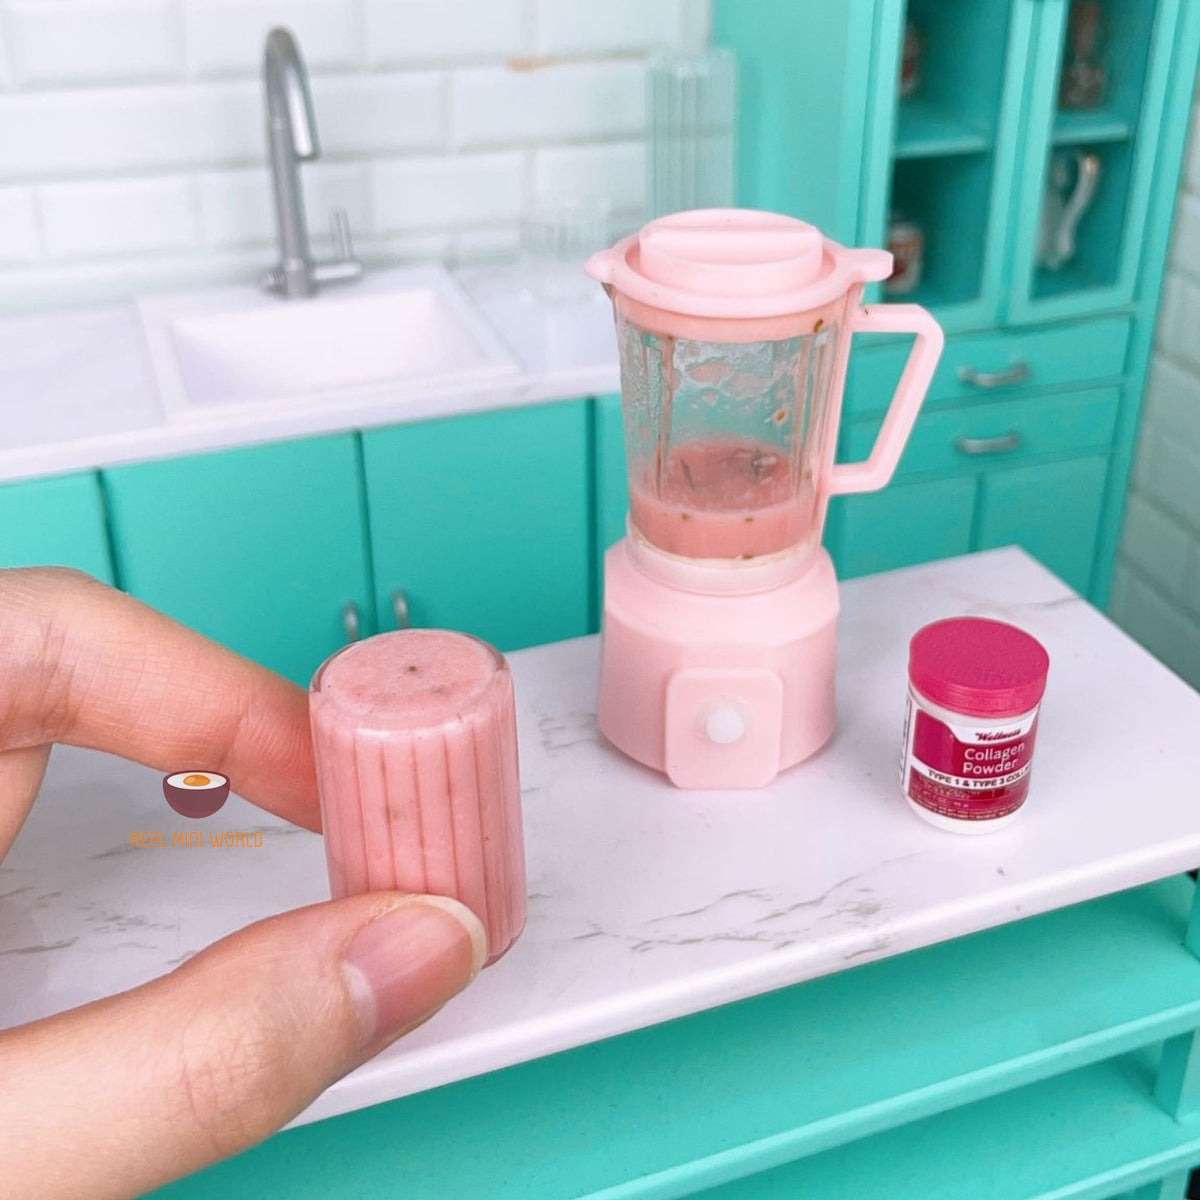 Miniature Real Working Blender Pink: Mini Cooking Kitchen Appliance – Real  Mini World